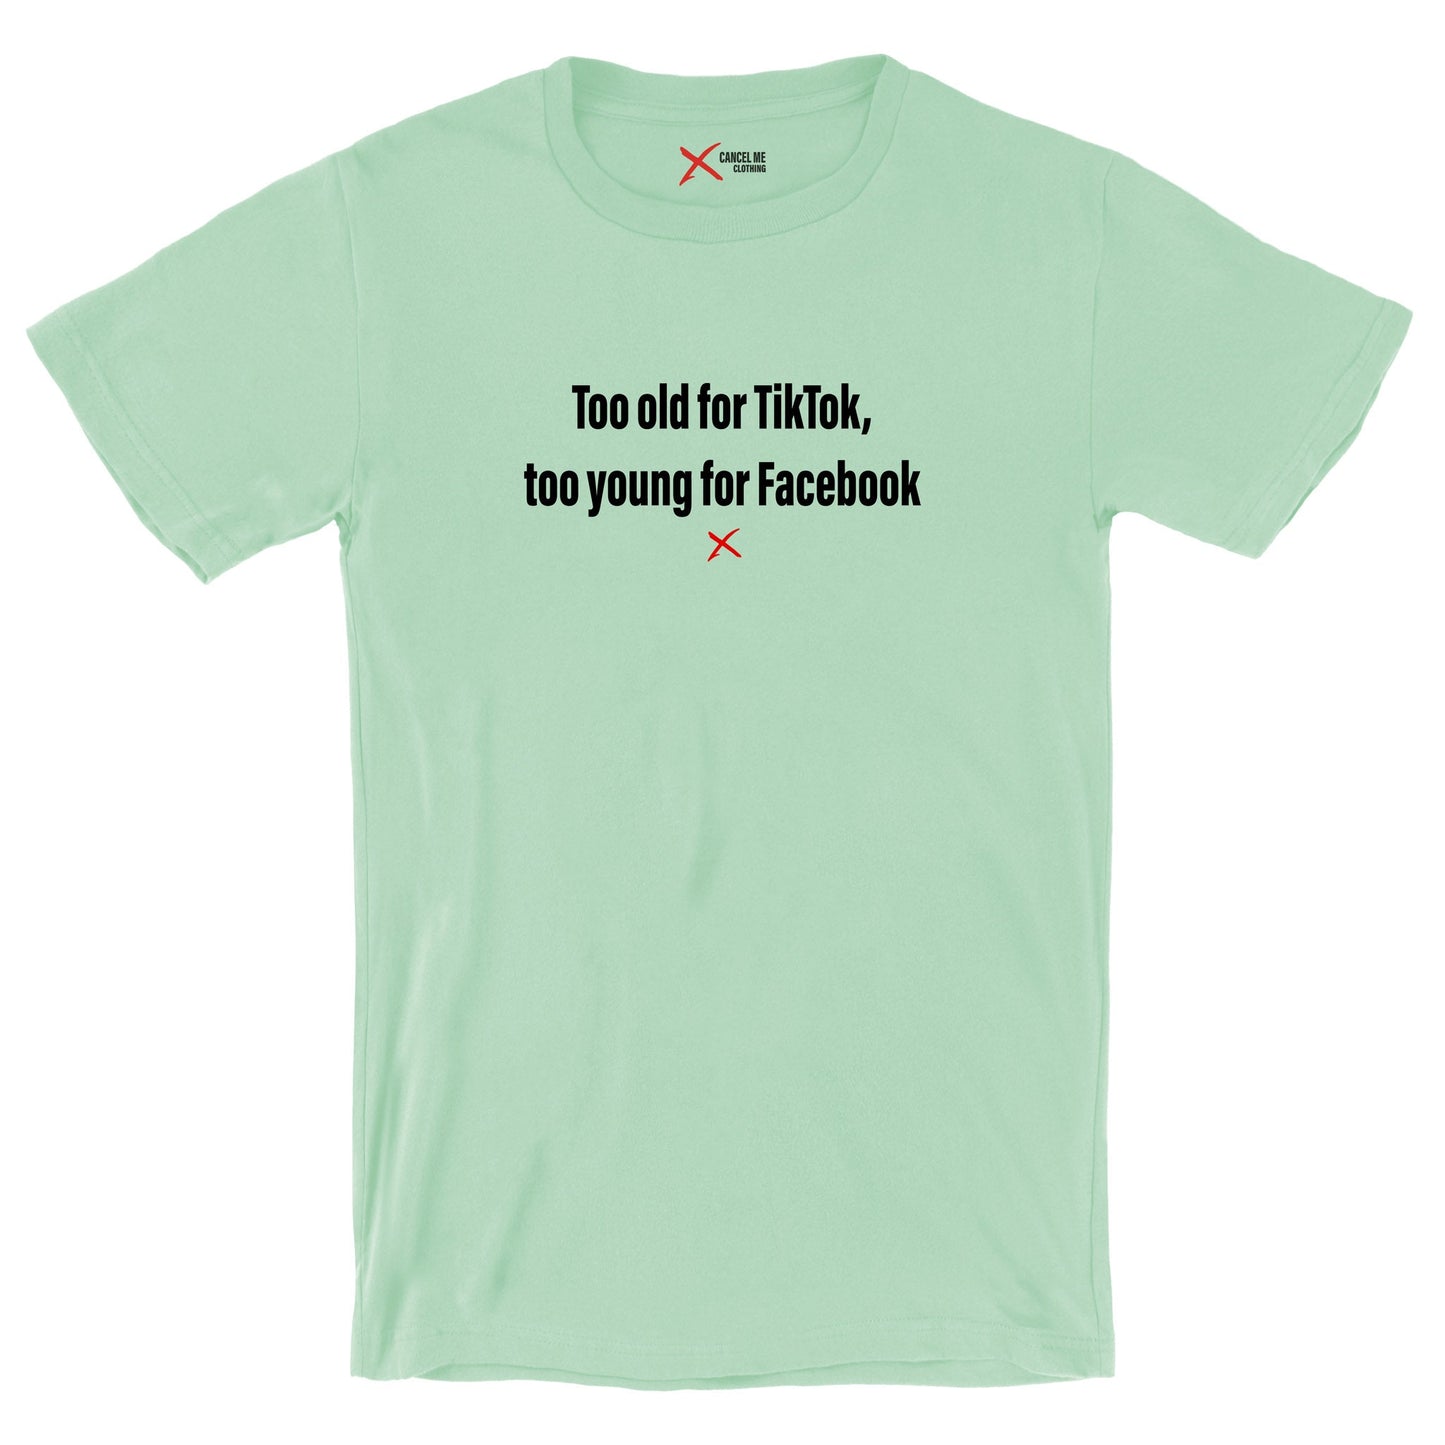 Too old for TikTok, too young for Facebook - Shirt